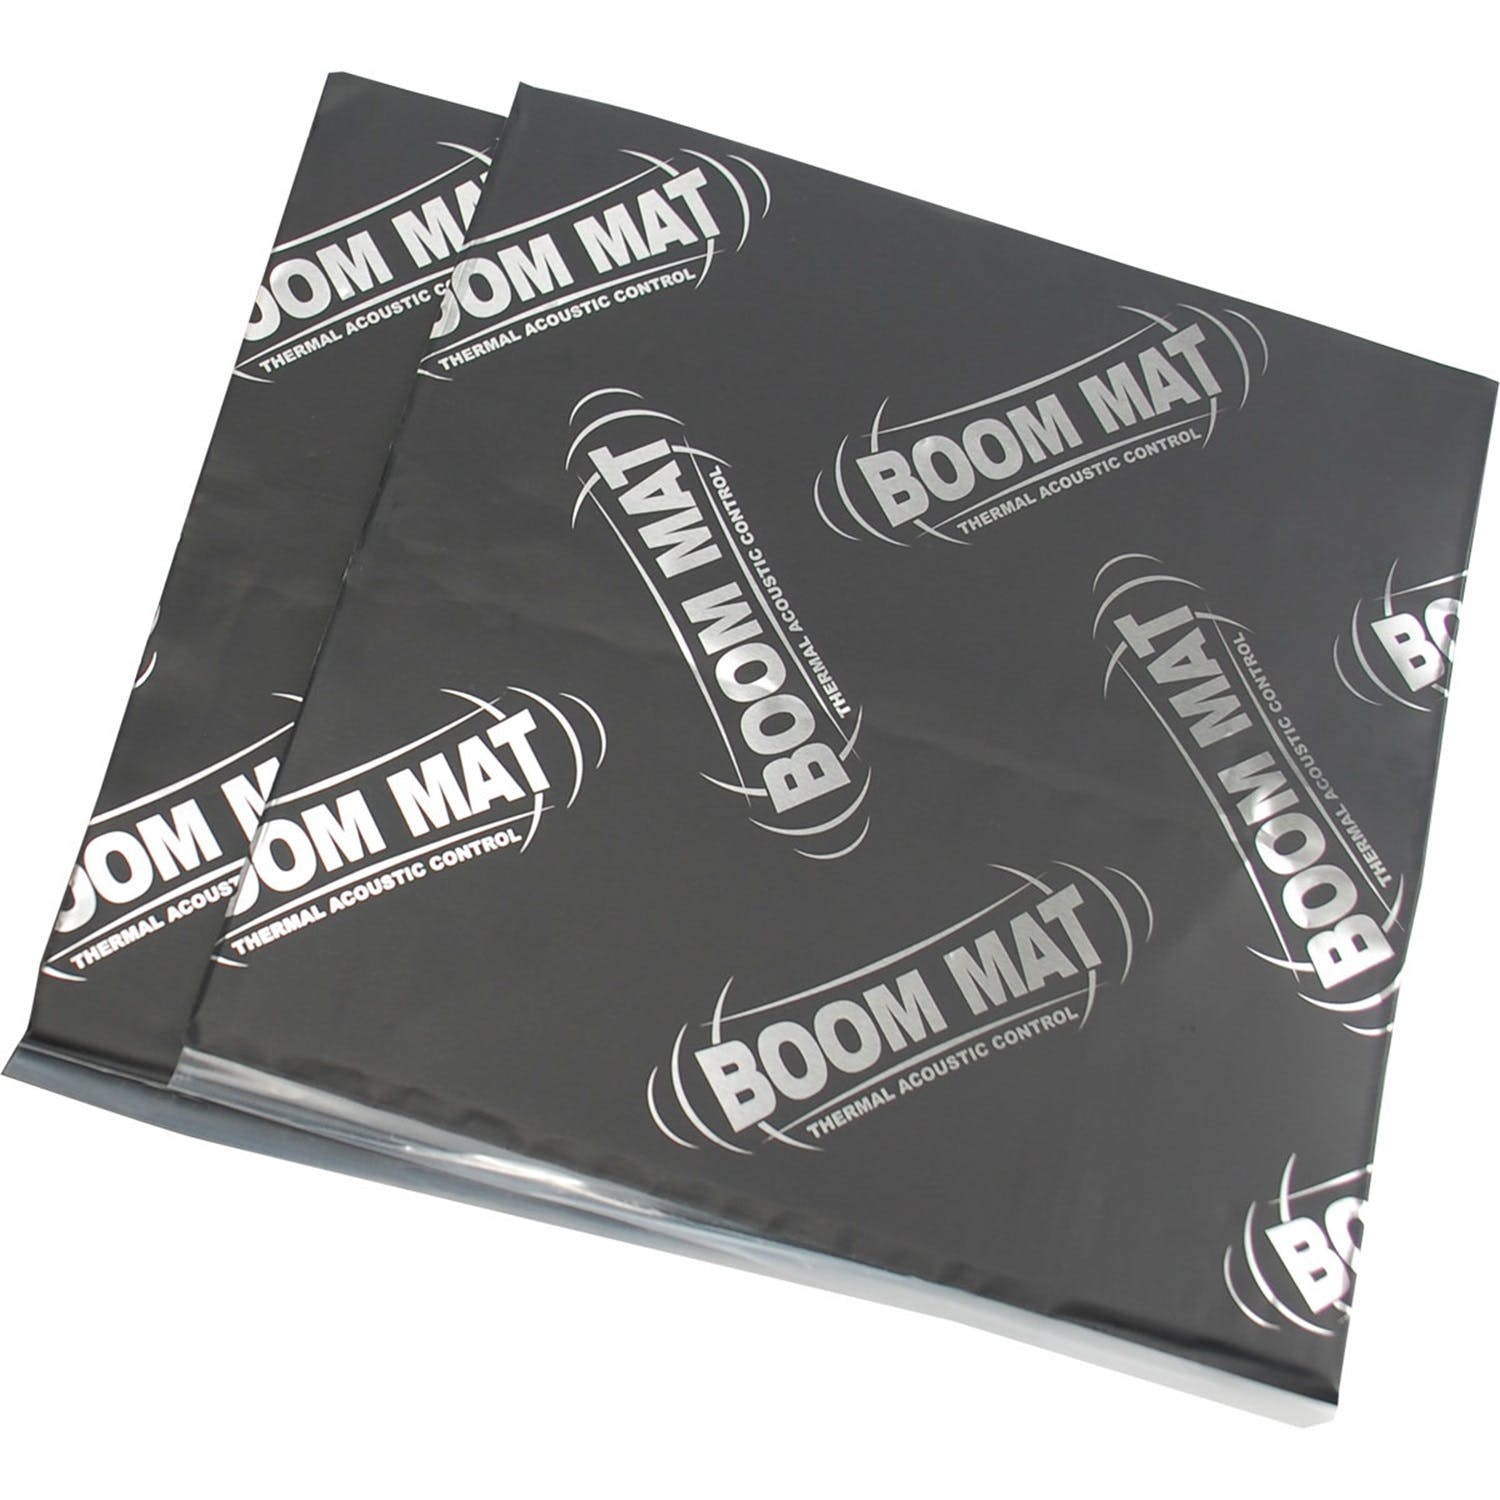 Design Engineering, Inc. 50200 Boom Mat Performance Acoustical Material 12 x 12-1/2 (2 sheets) (2.1 Sq F